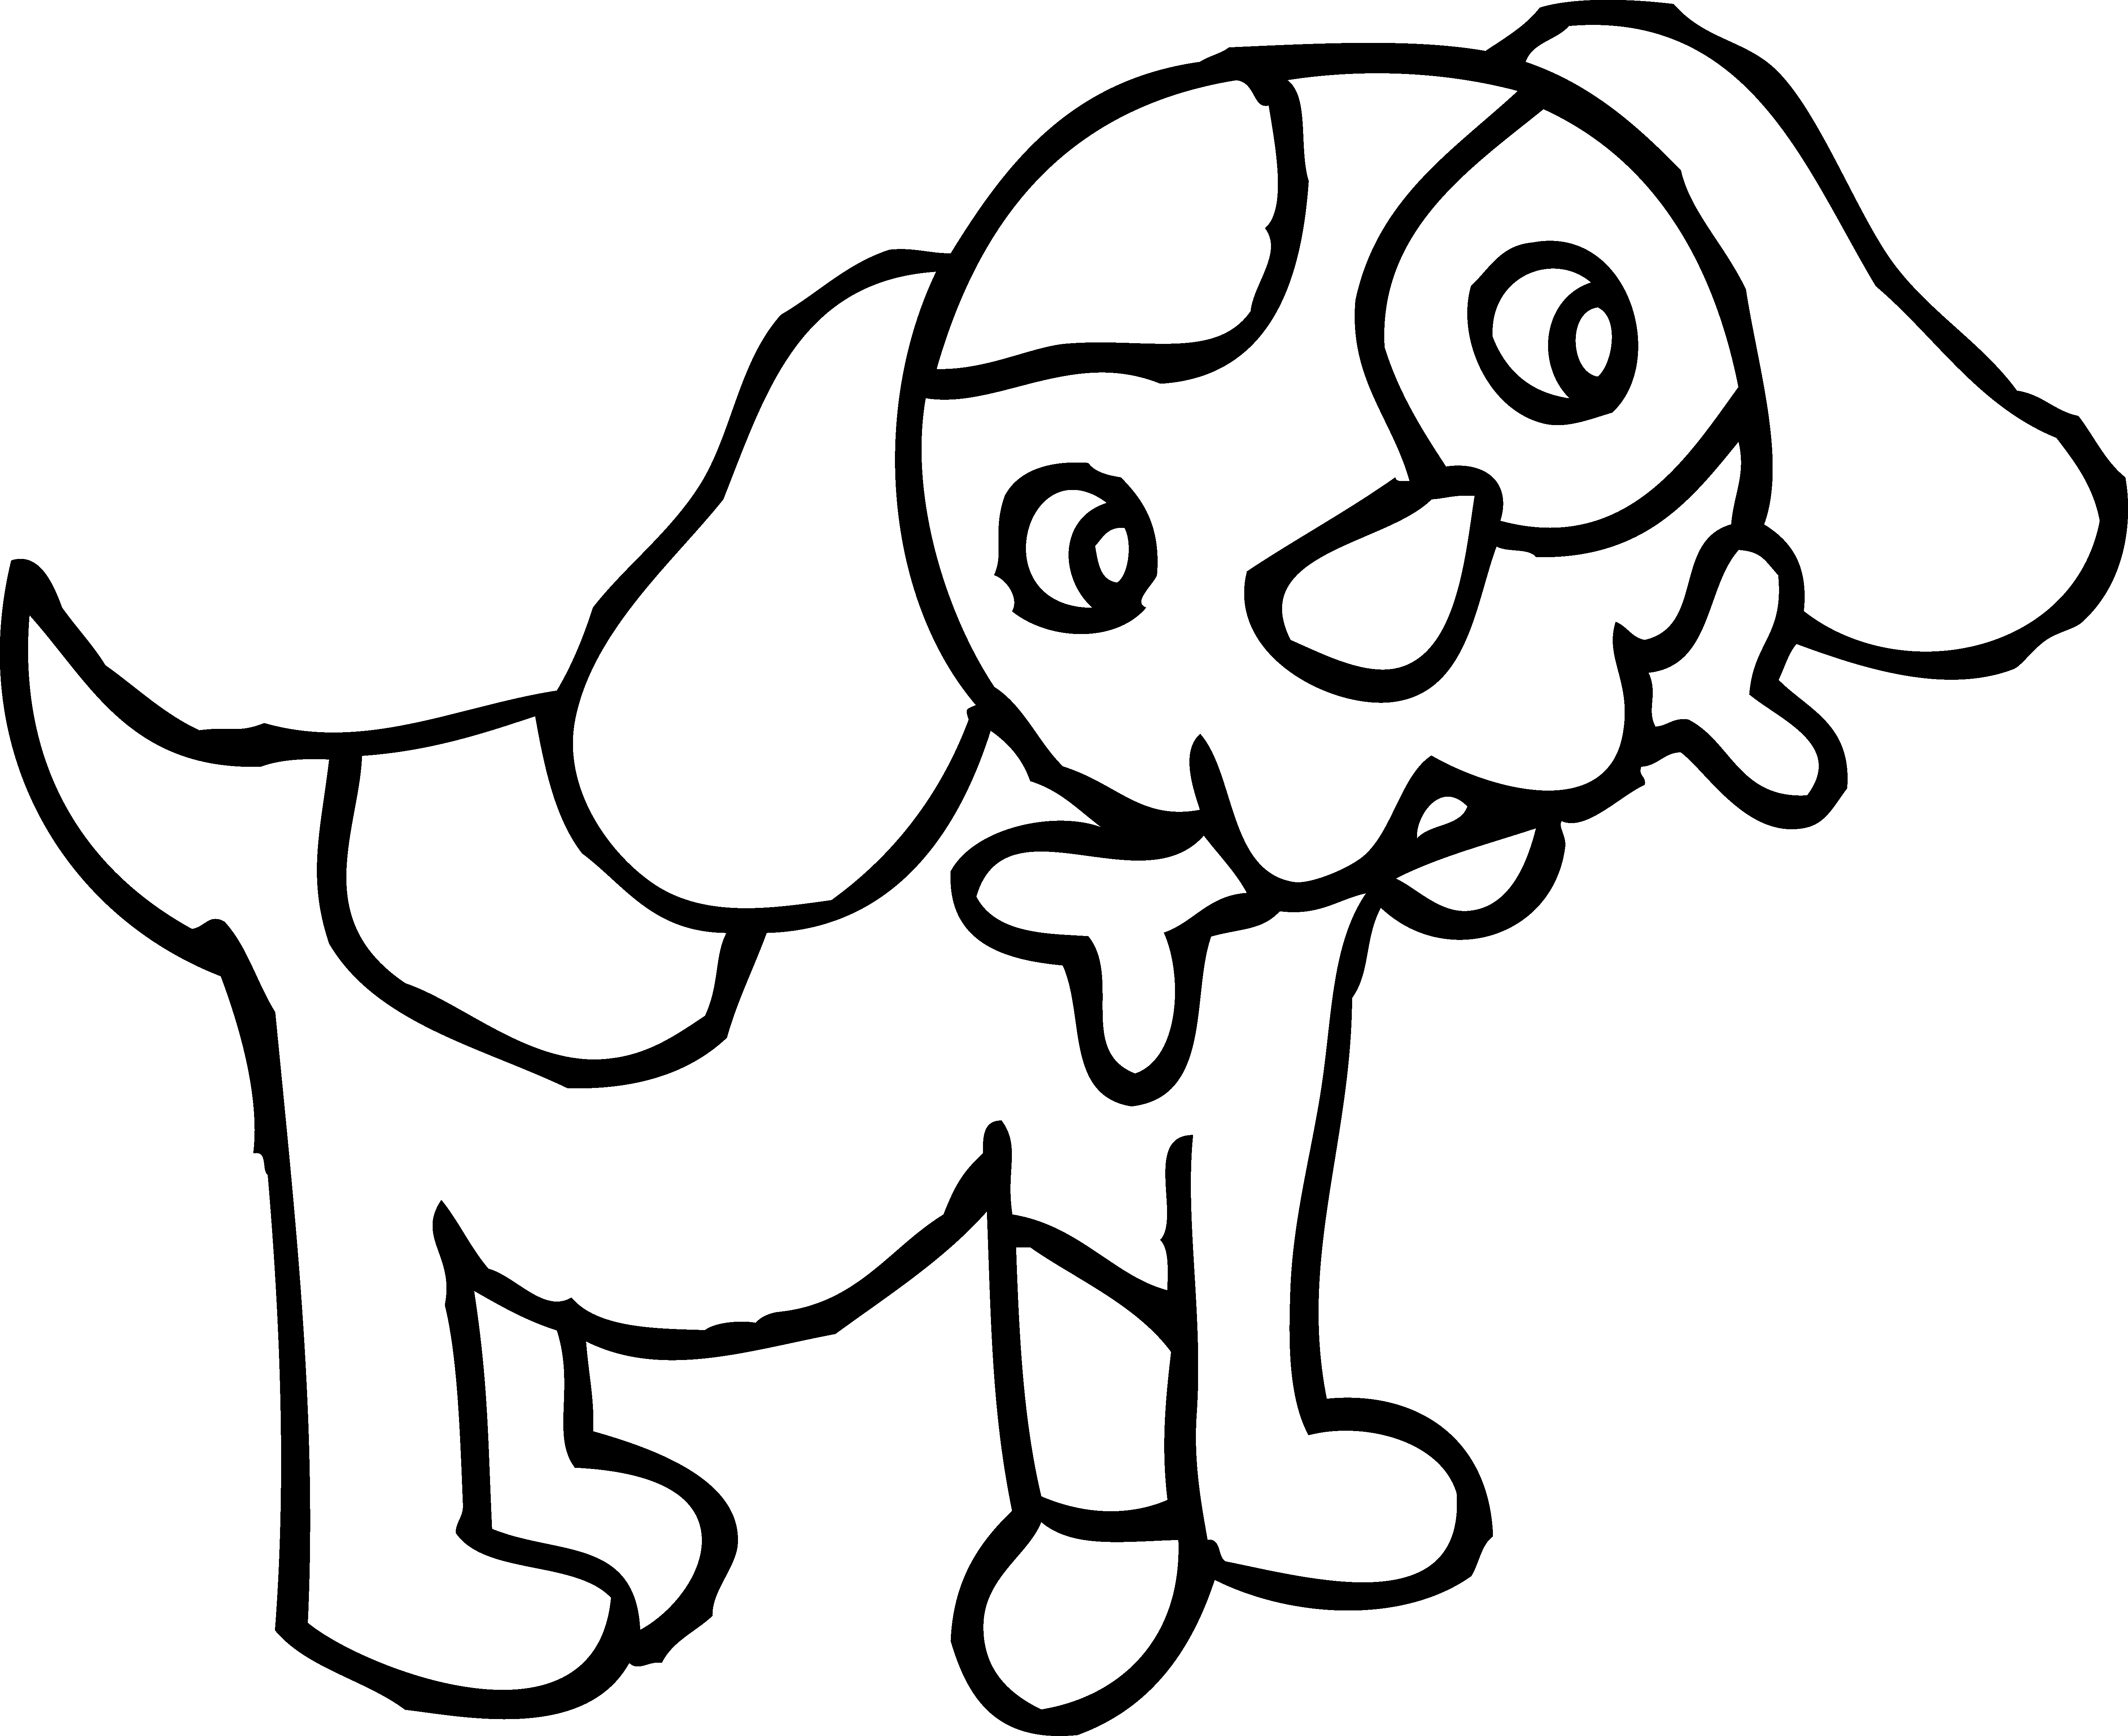 Black And White Picture Of A Dog | Free Download Clip Art | Free ...